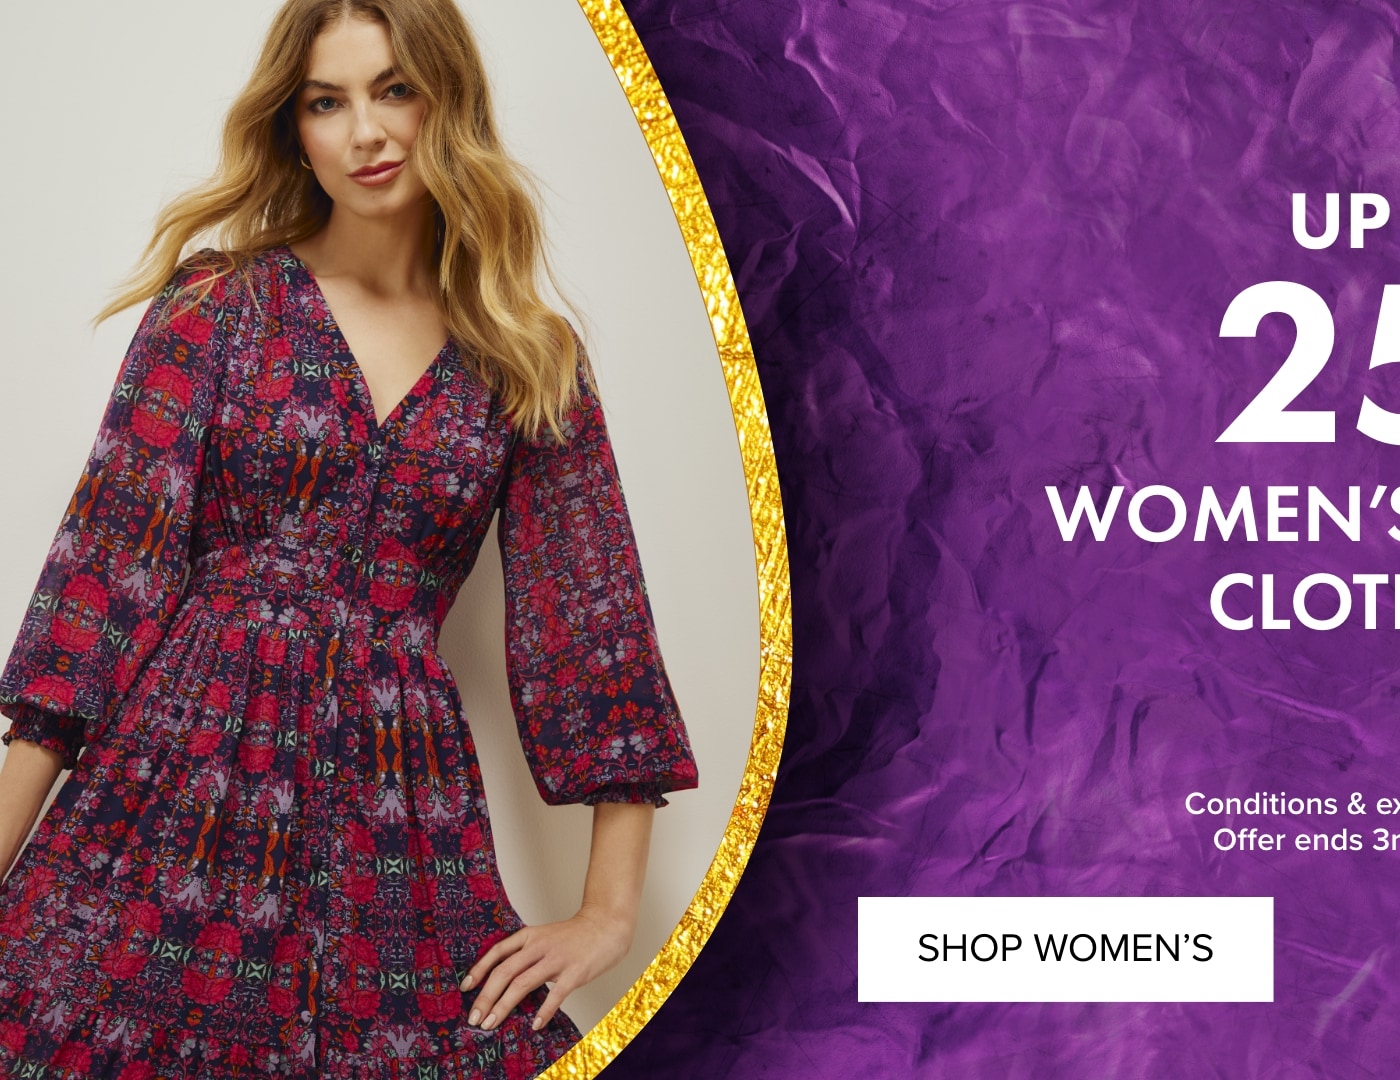 Up to 25% OFF Selected Women’s Clothing 